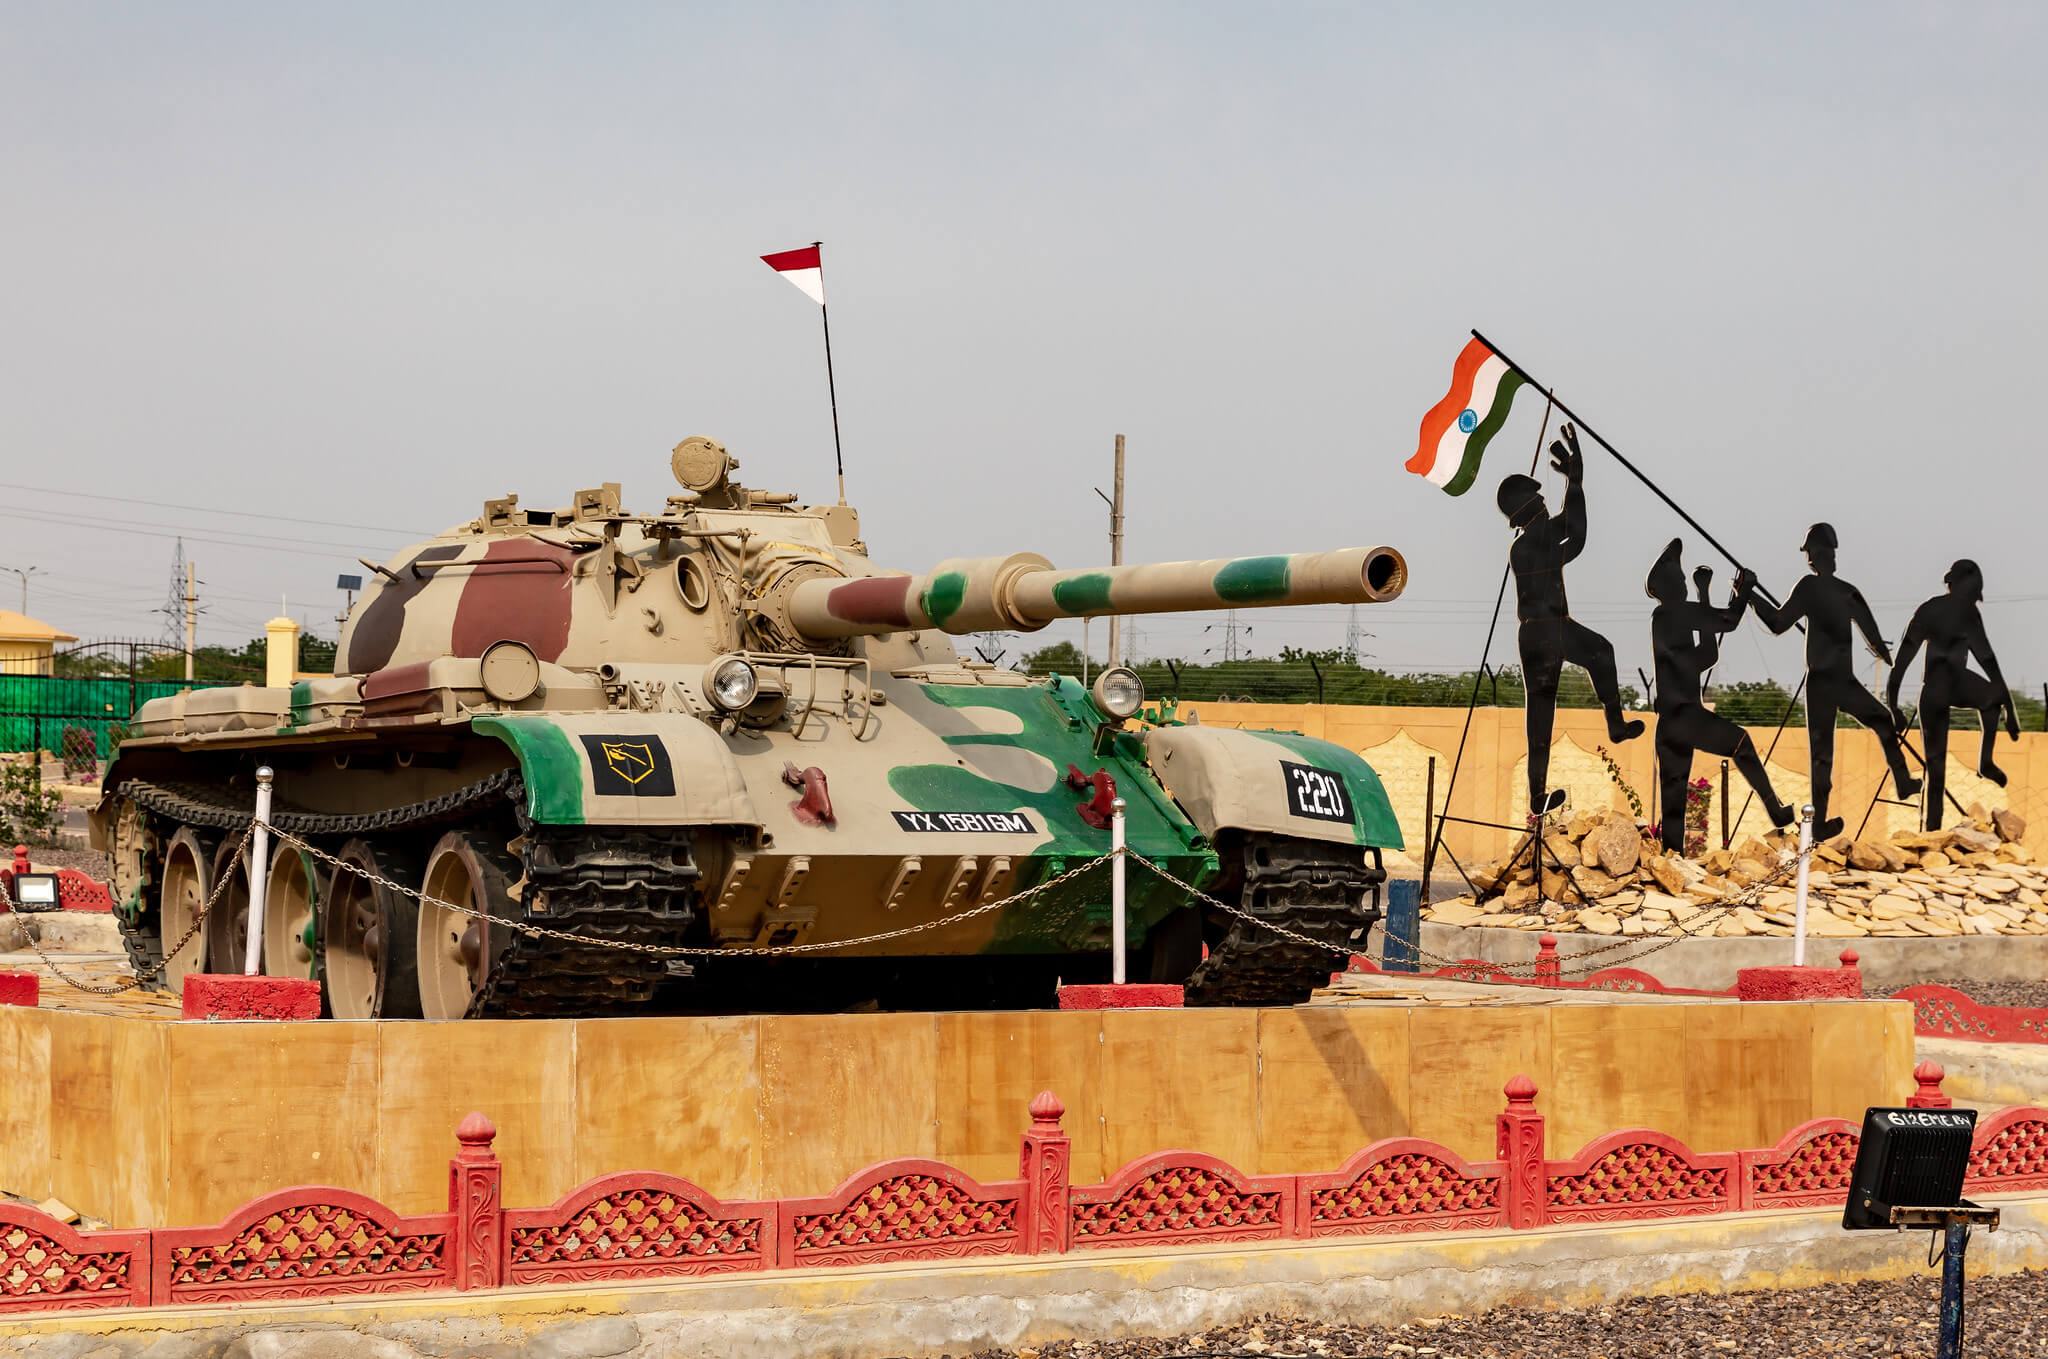 A monument to Indian soldiers in Jaisalmer, near the Pakistani border. © Ninara / Flickr